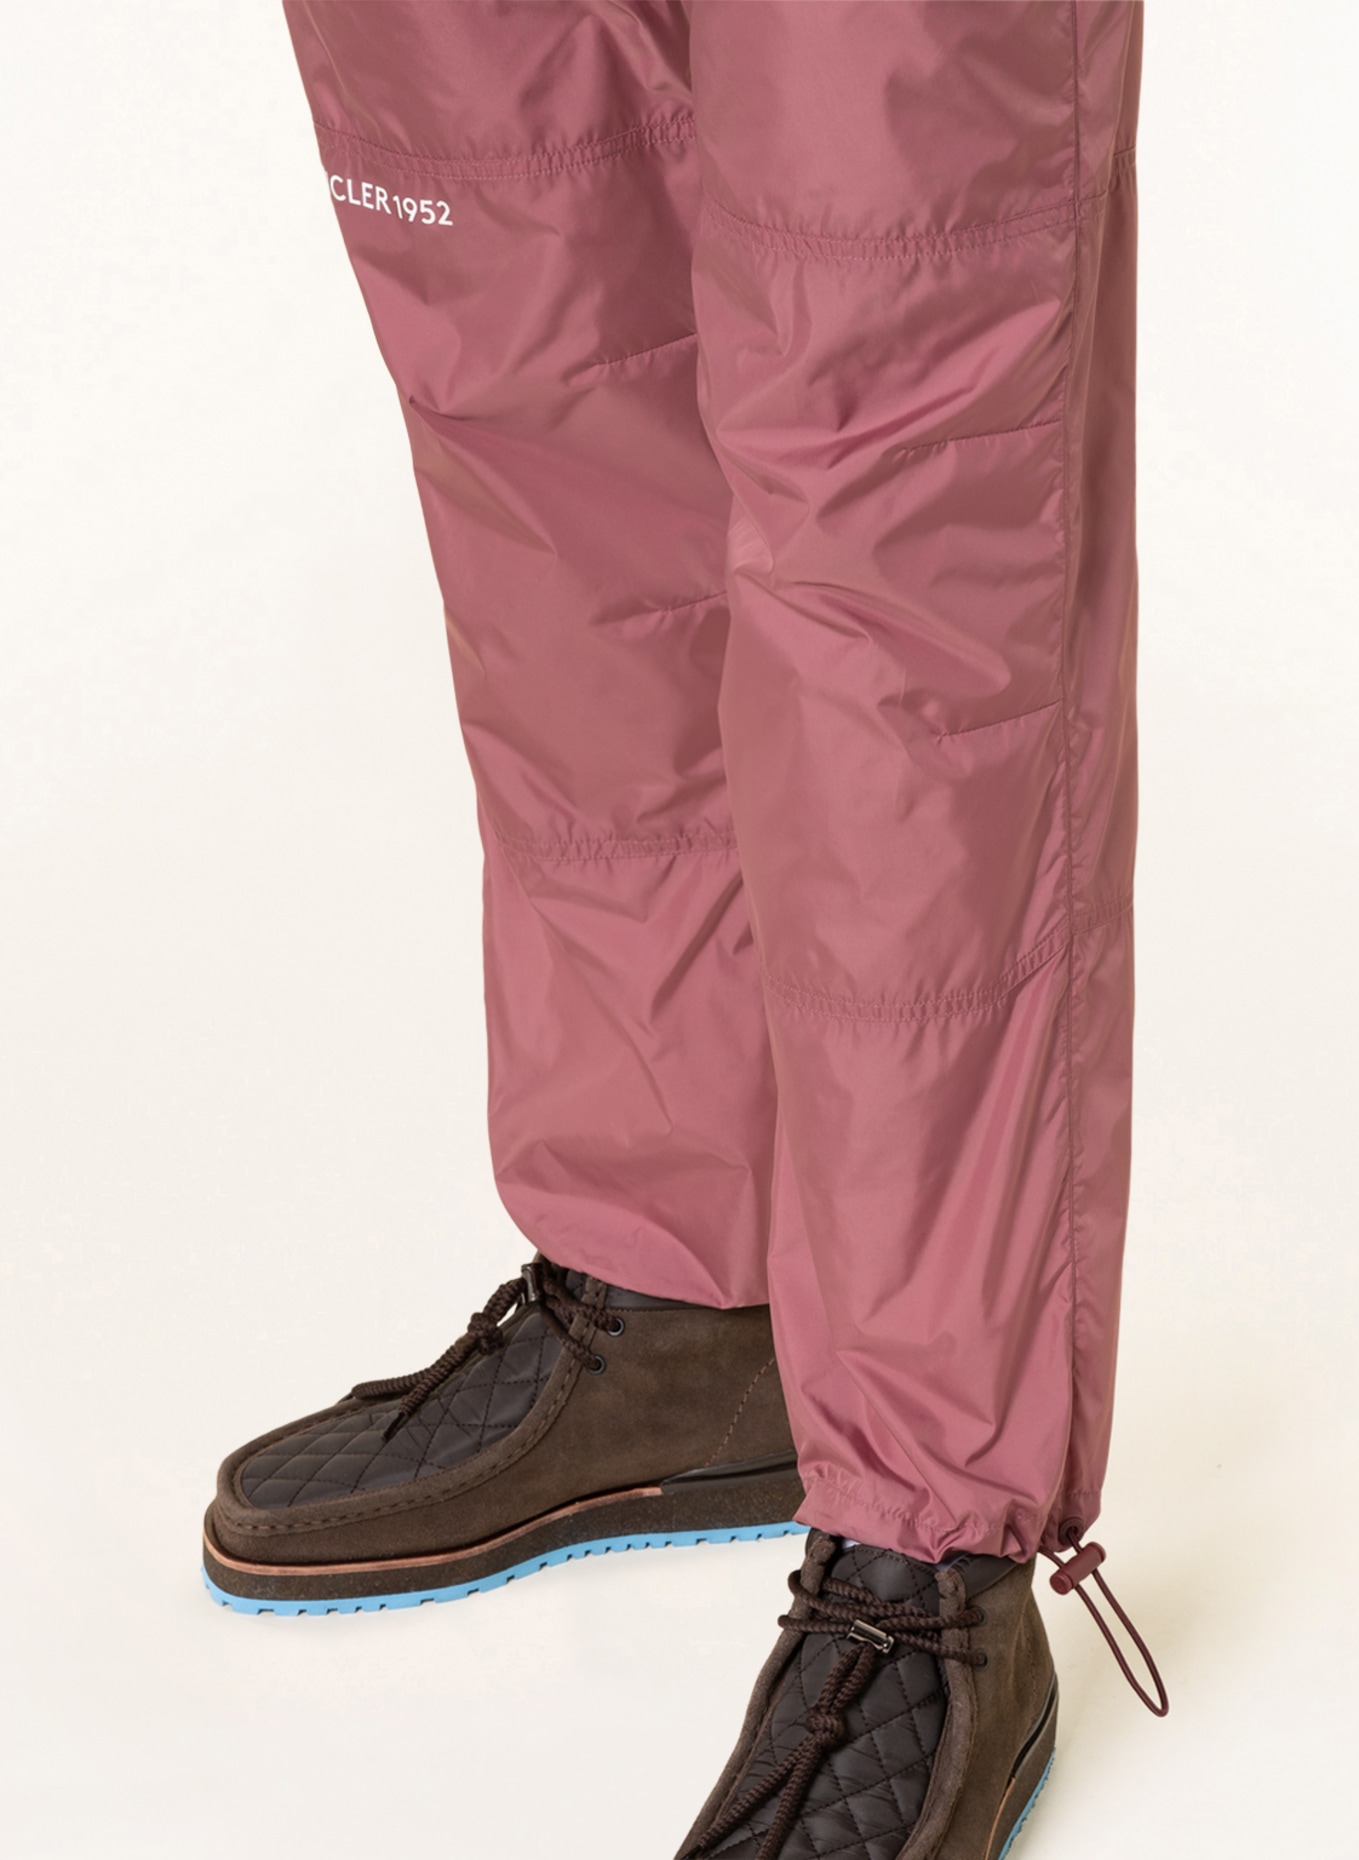 MONCLER GENIUS Trousers in jogger style , Color: DUSKY PINK (Image 5)